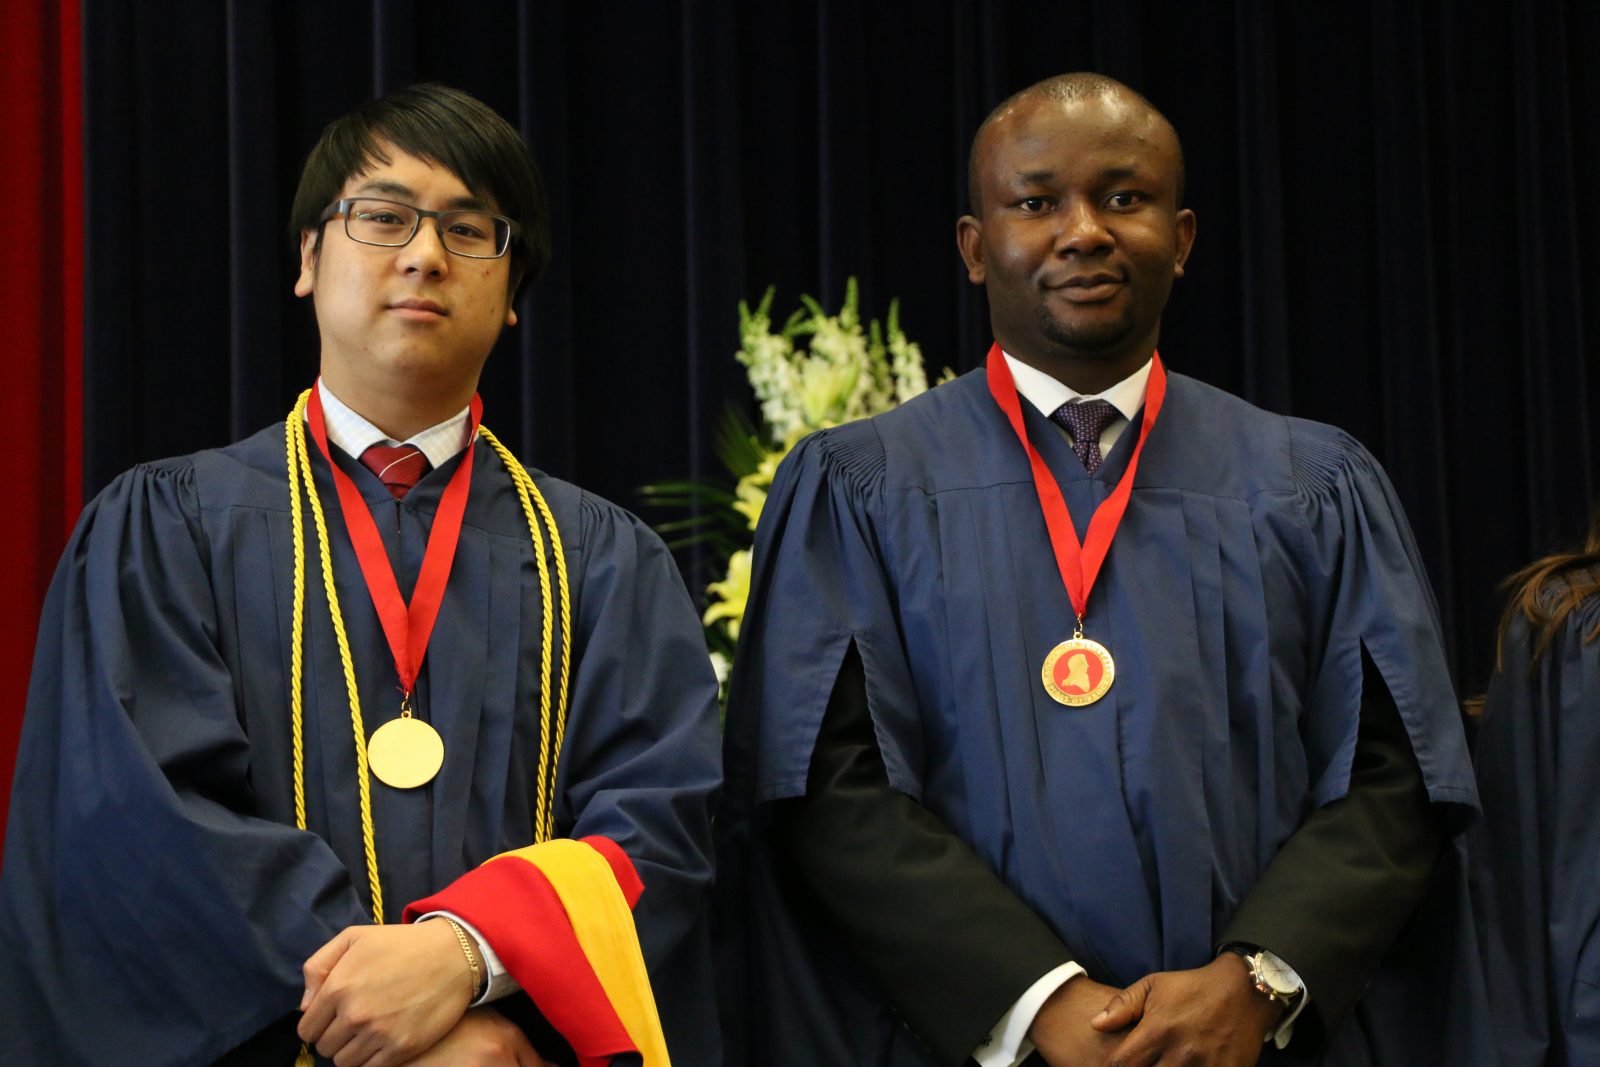 Board of Trustees Spirit of Brock award winners from the Faculty of Mathematics and Science David Nguyen, undergrad, and graduate student Chimaobi Amadi.